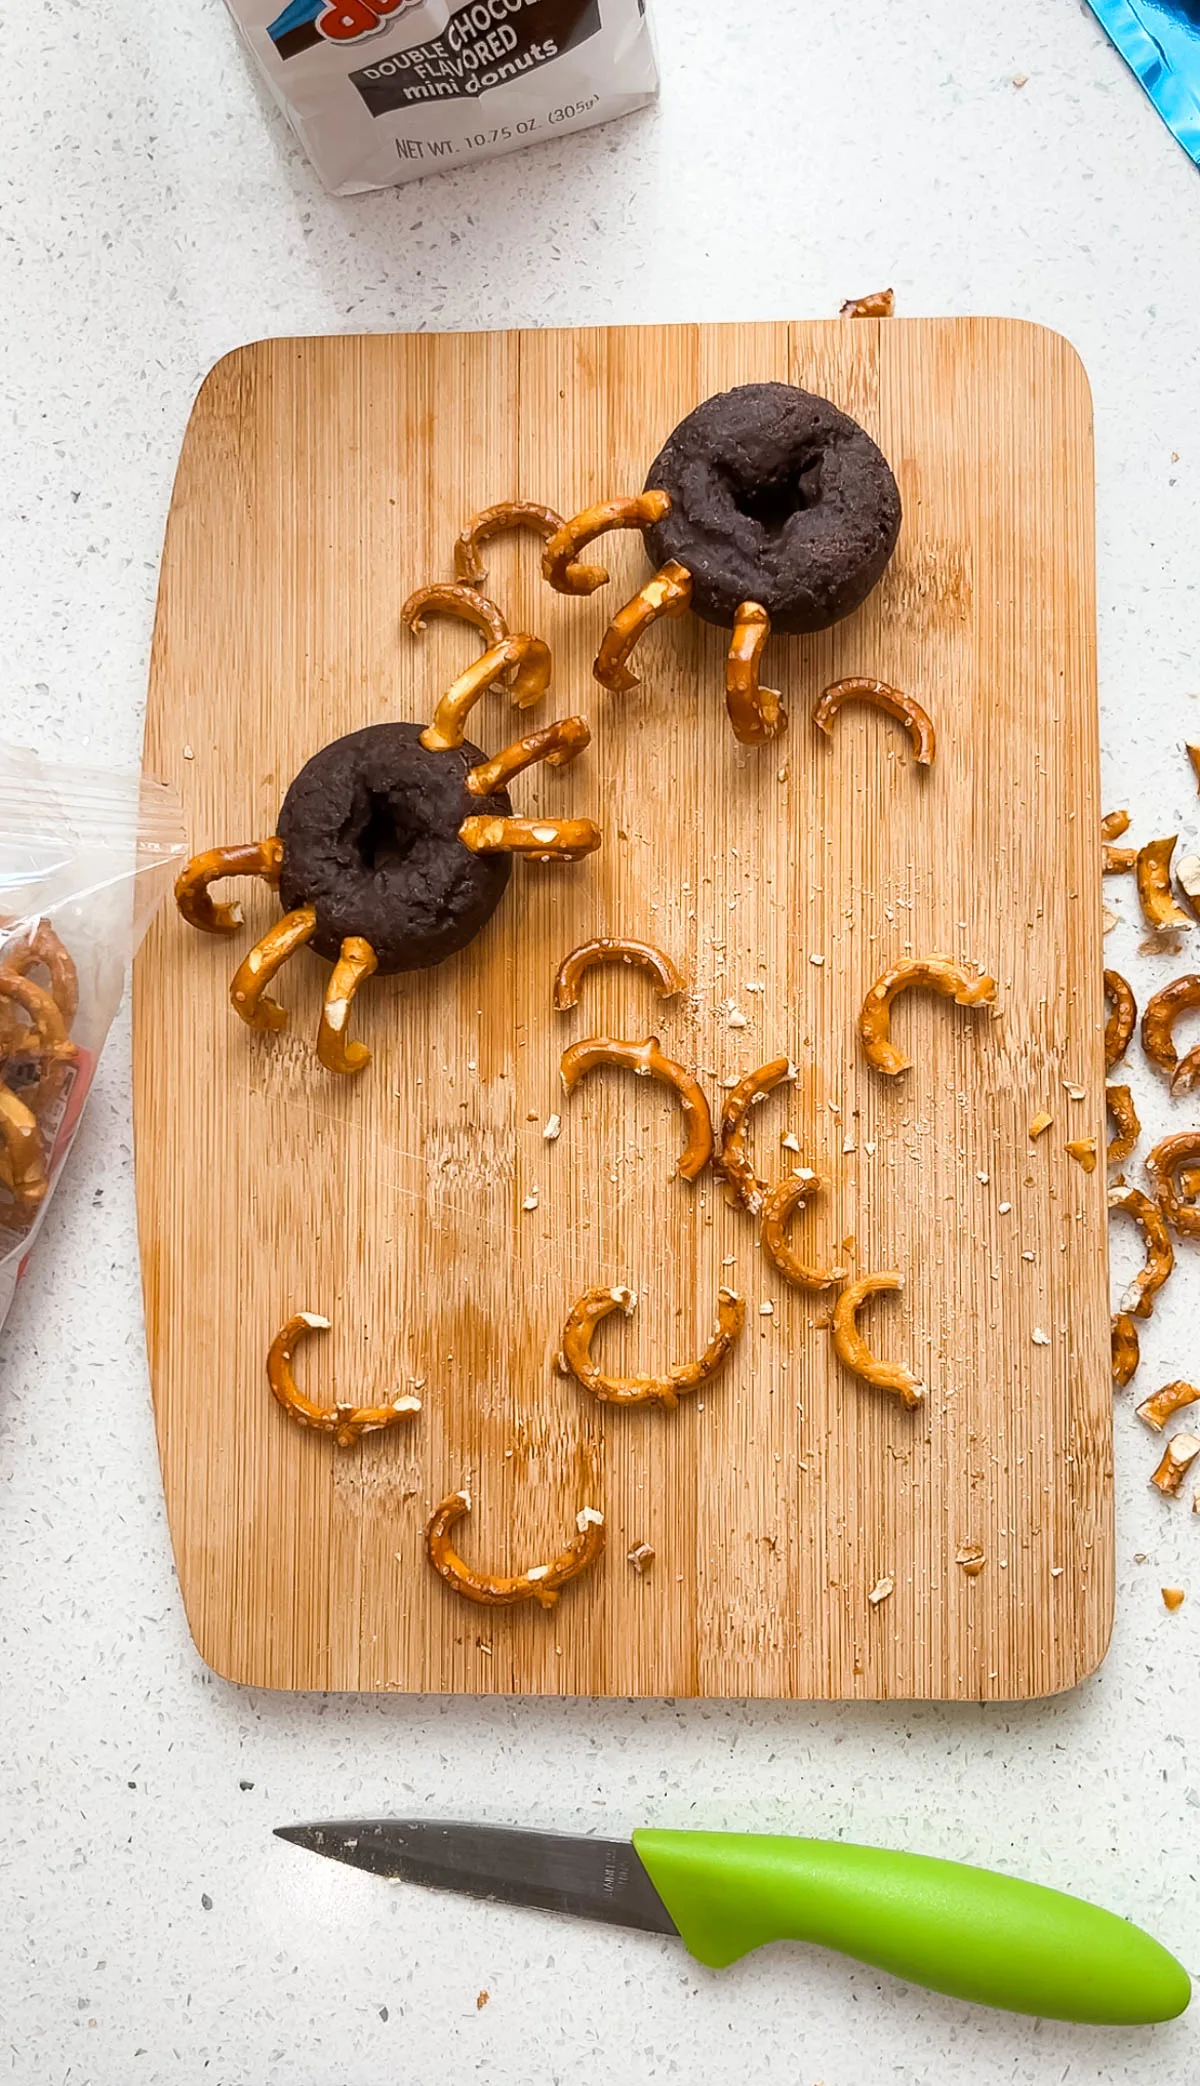 Two mini chocolate donuts with preztel legs surrounded by broken pretzel pieces.